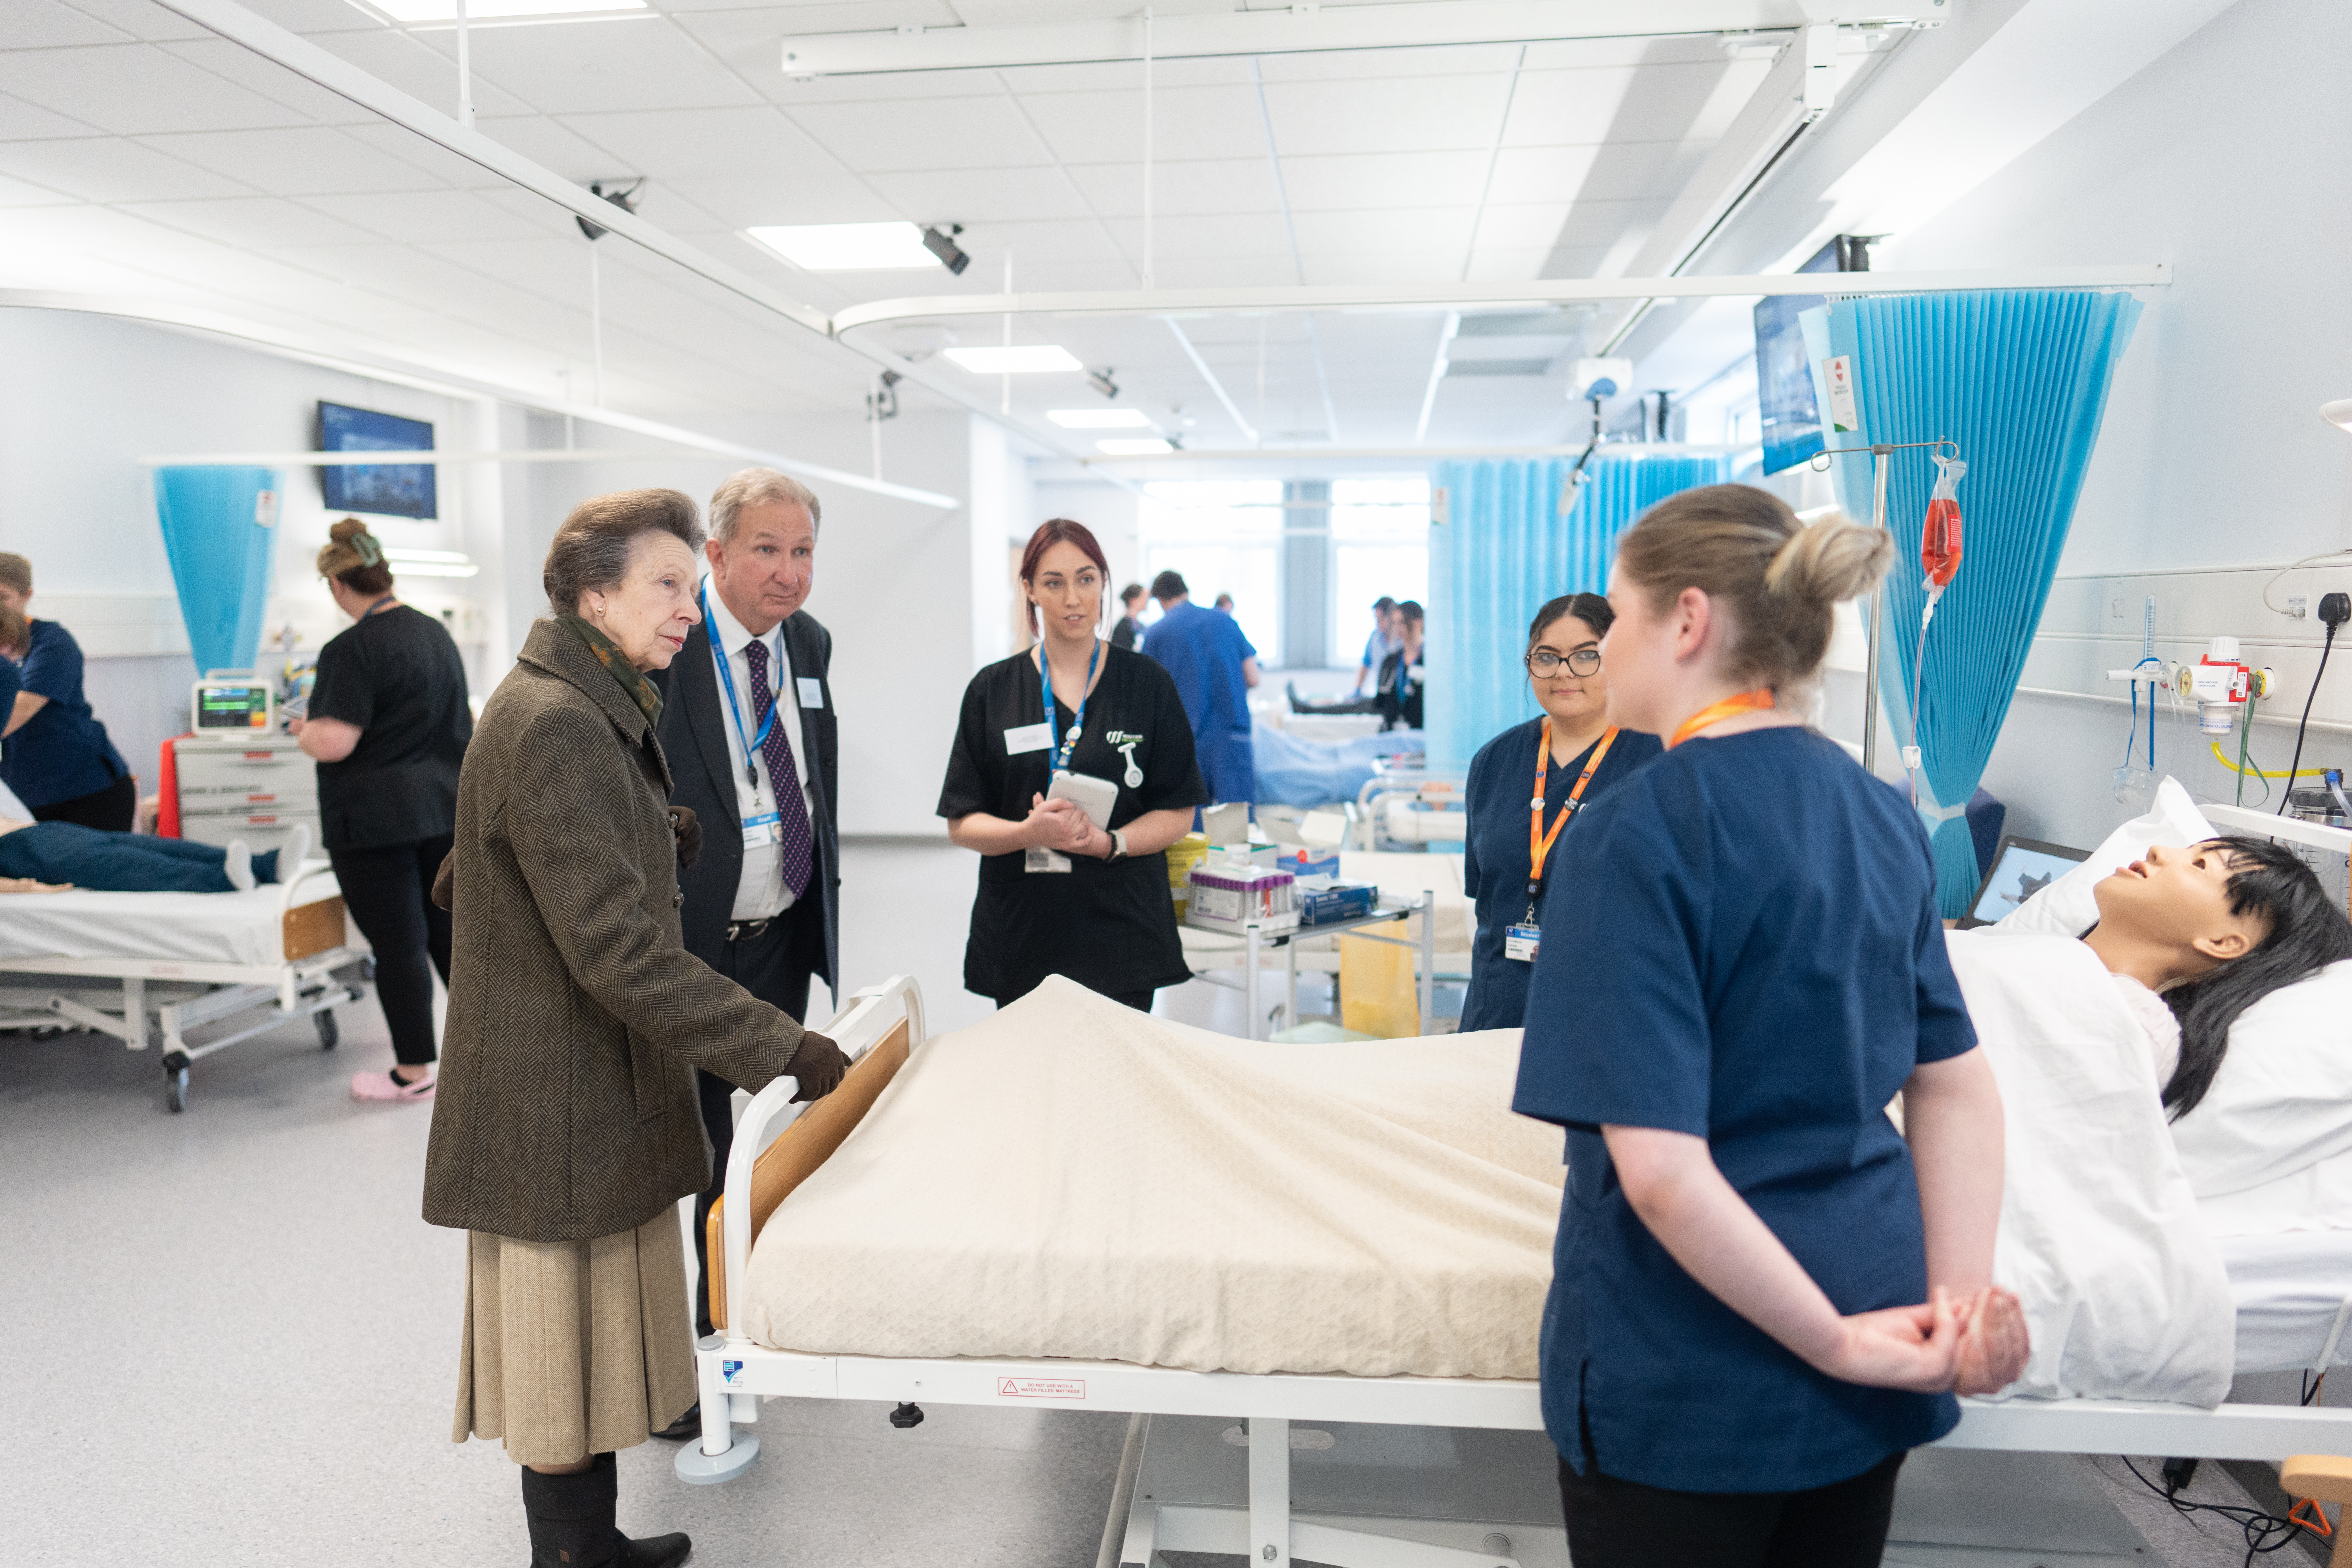 HRH talking to students in the simulation room